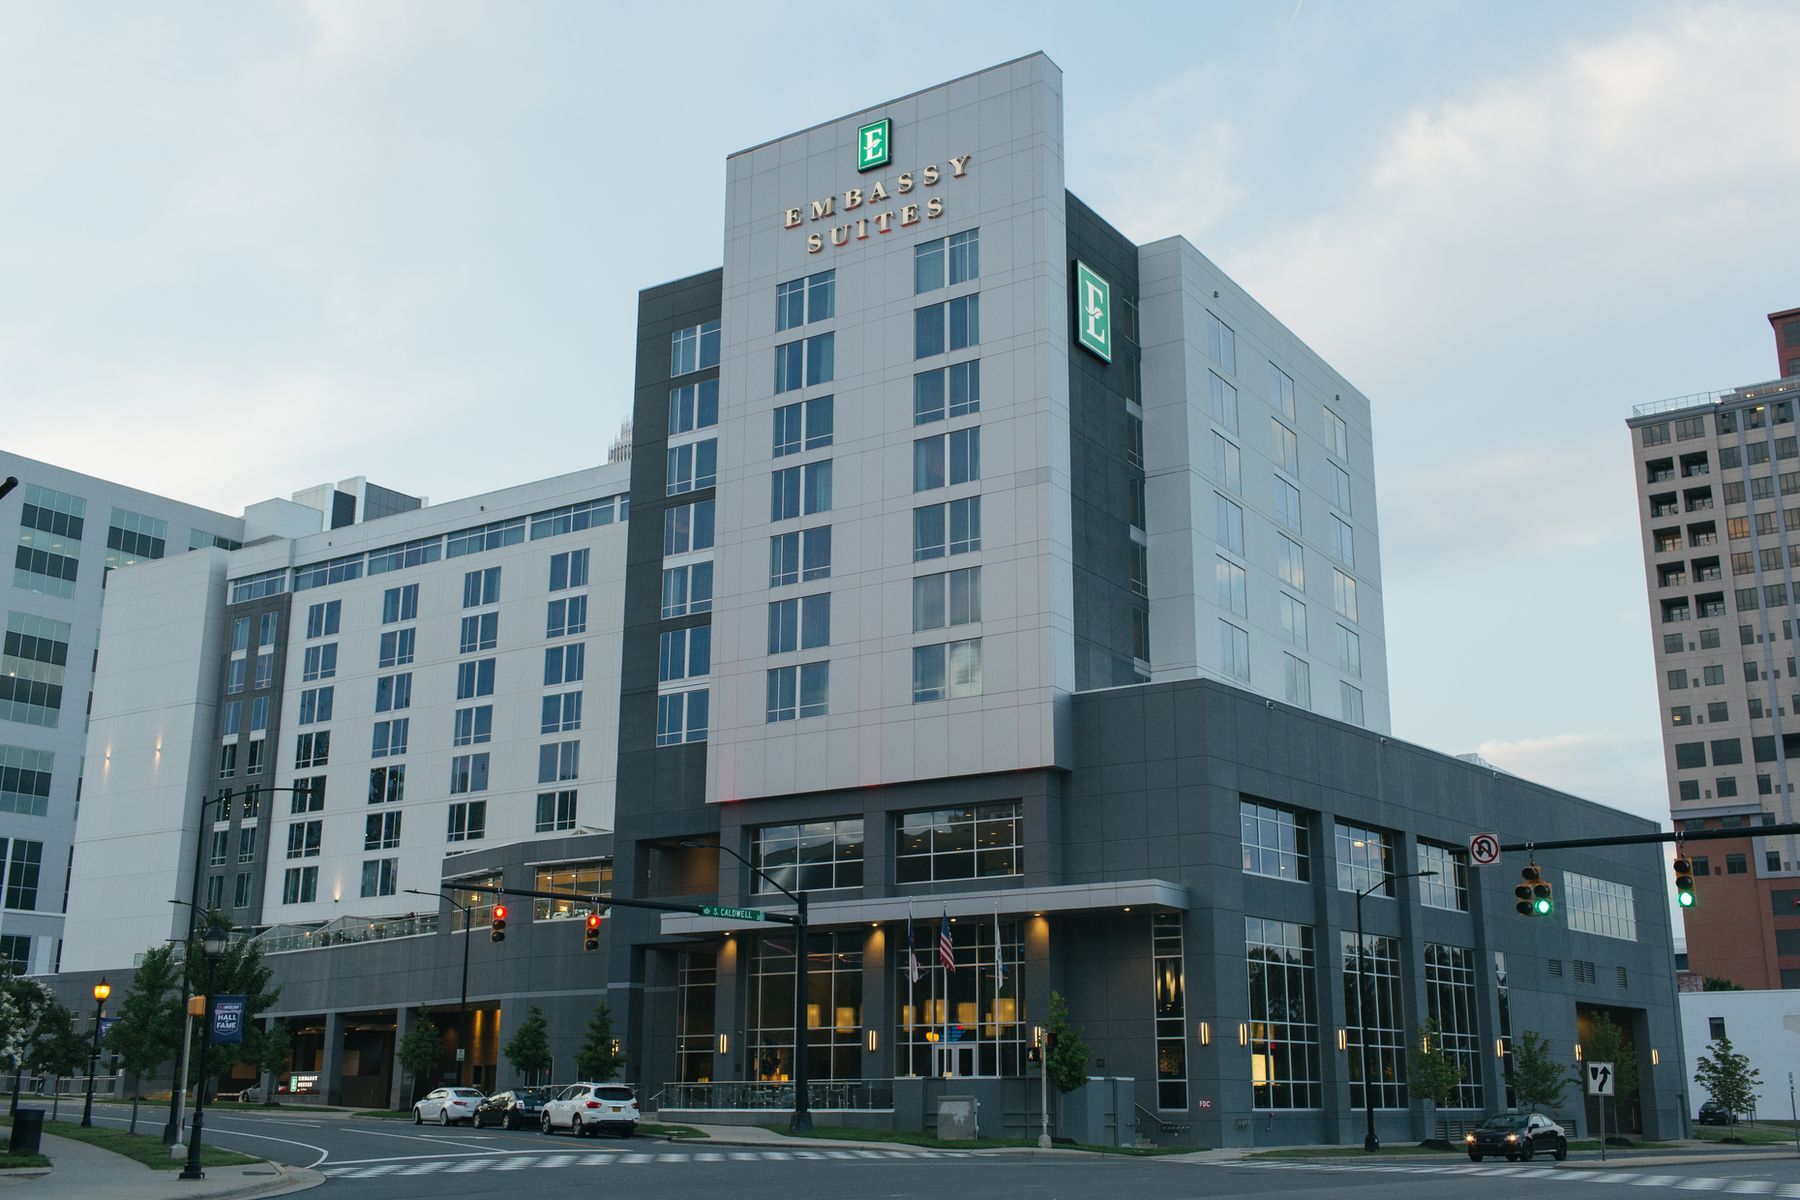 <p>Part of the Hilton family, Embassy Suites <a href="https://stories.hilton.com/uploads/2023/07/Q2-2023-Embassy-Suites-by-Hilton-Fact-Sheet.pdf">provides all-suite hotels</a> that include “a two-room suite, free made-to-order breakfast each morning, and complimentary drinks and snacks every evening.” The brand is rapidly expanding within the luxury travel market, with over 260 Embassy Suites locations worldwide and over 30 more in development.</p>